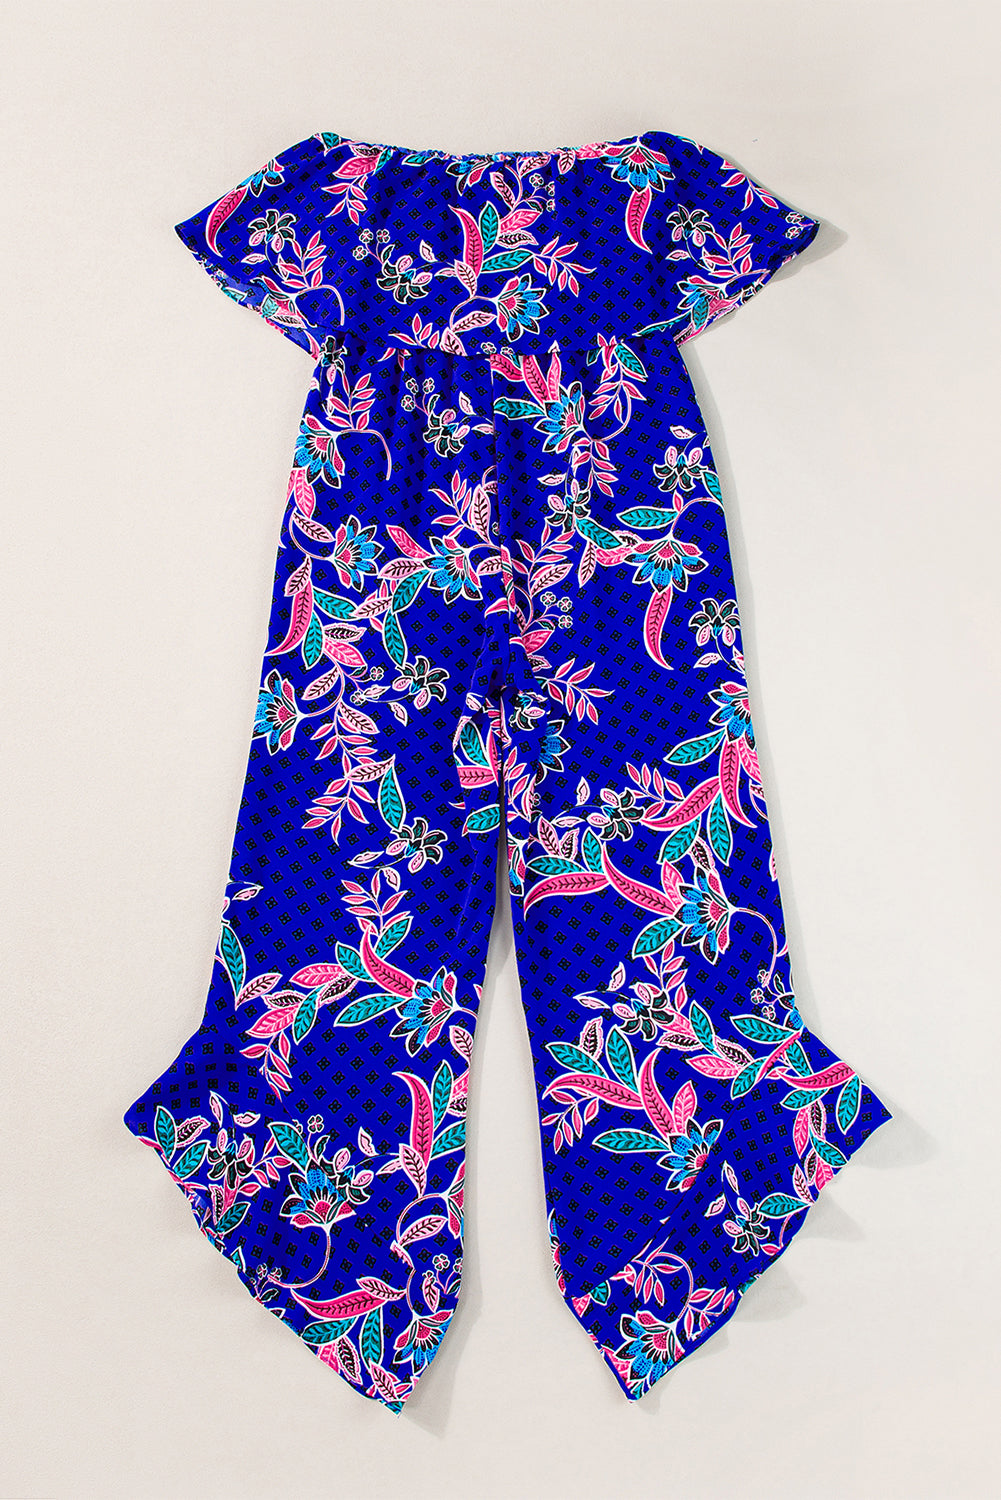 Blue Mix Tropical Print Strapless Ruffled Jumpsuit Blue Zone Planet